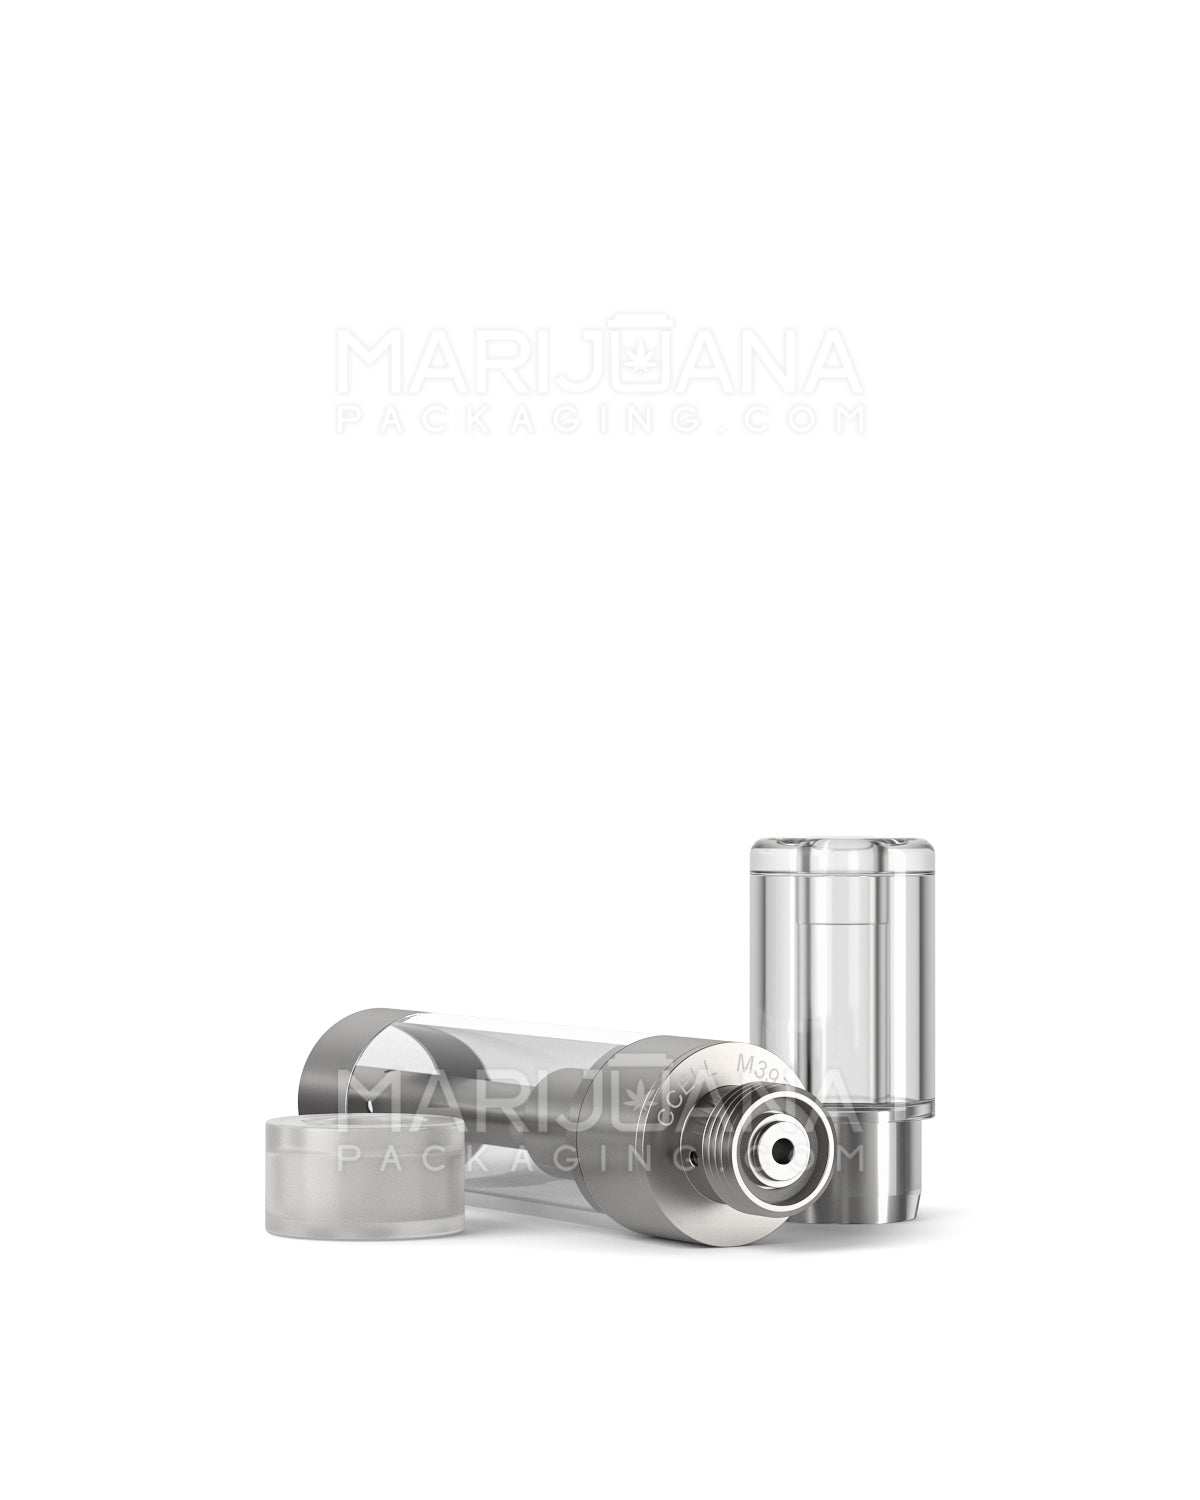 CCELL | Liquid6 Reactor Plastic Vape Cartridge with Barrel Clear Plastic Mouthpiece | 1mL - Press On - 100 Count - 8